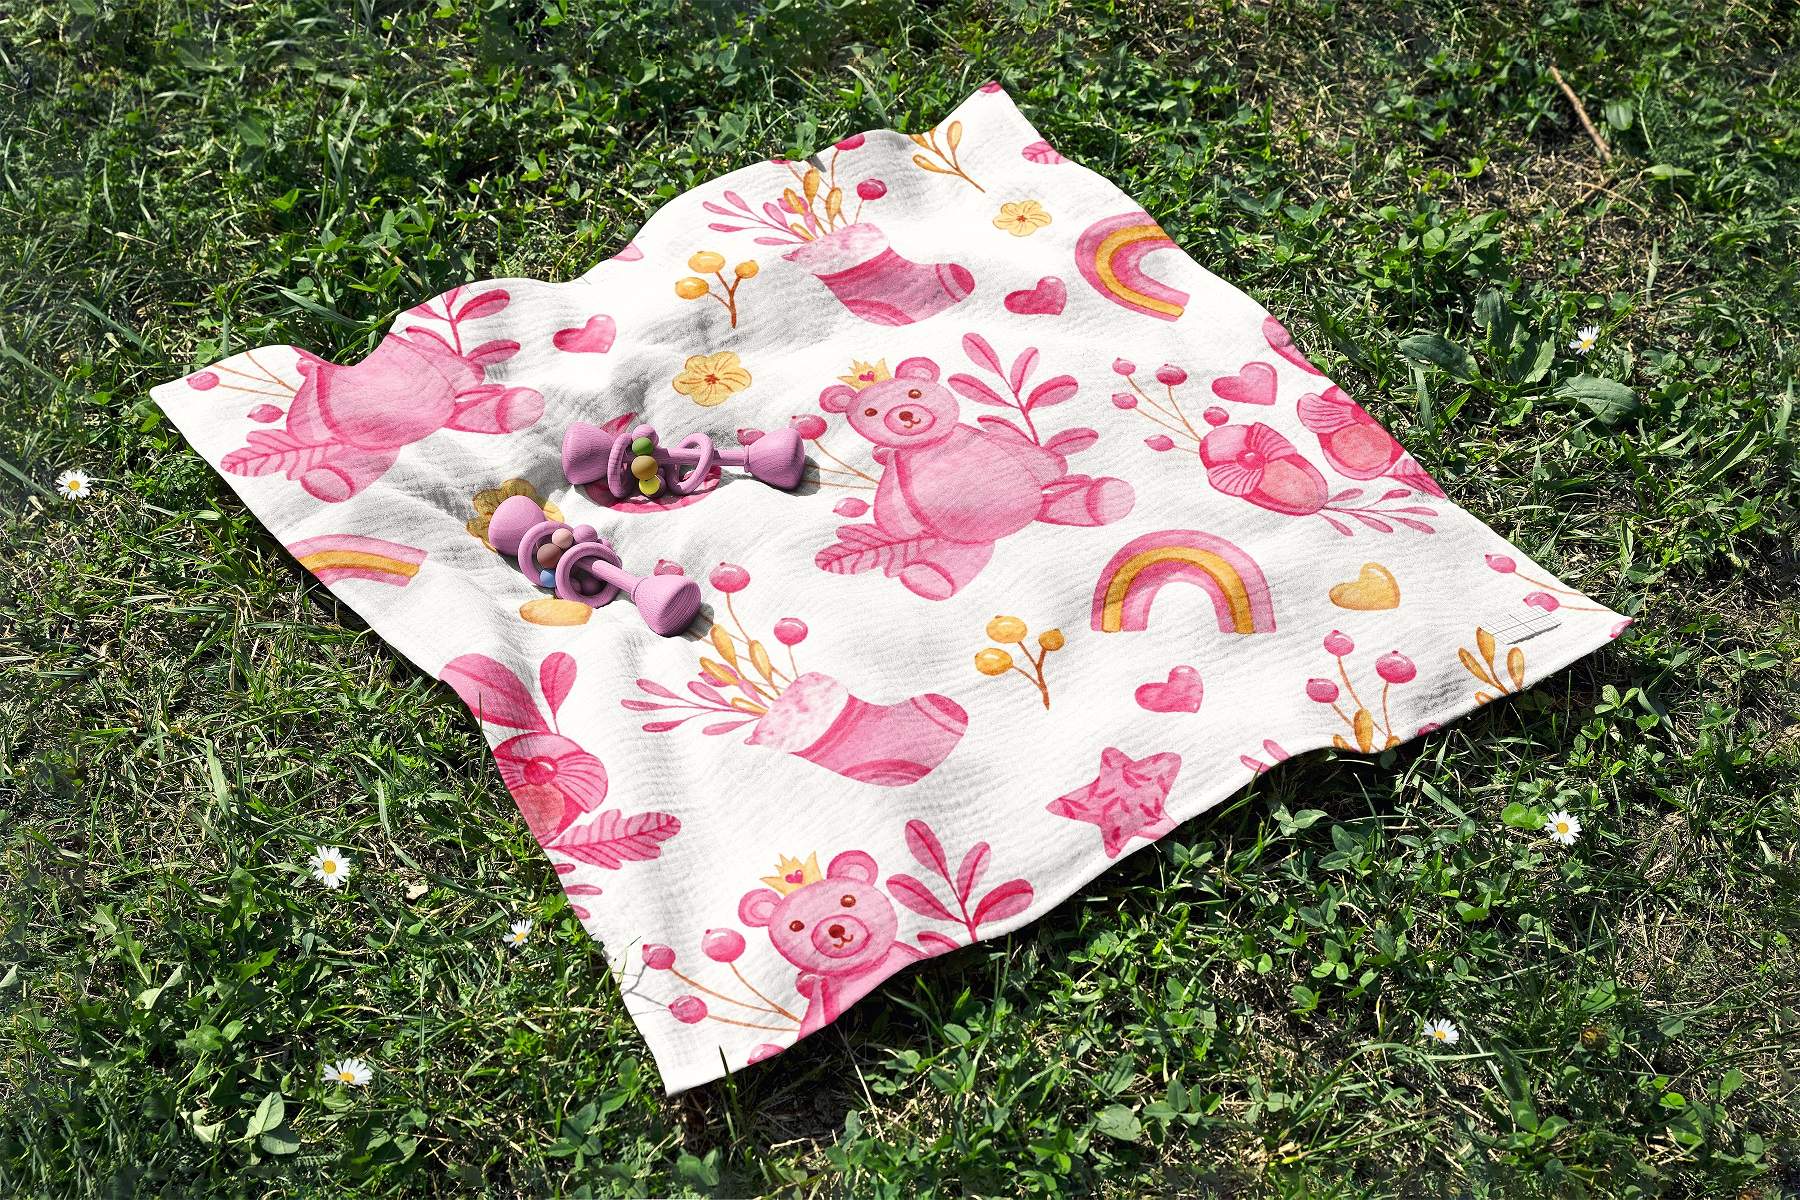 Pink and white blanket laying on top of a lush green field.